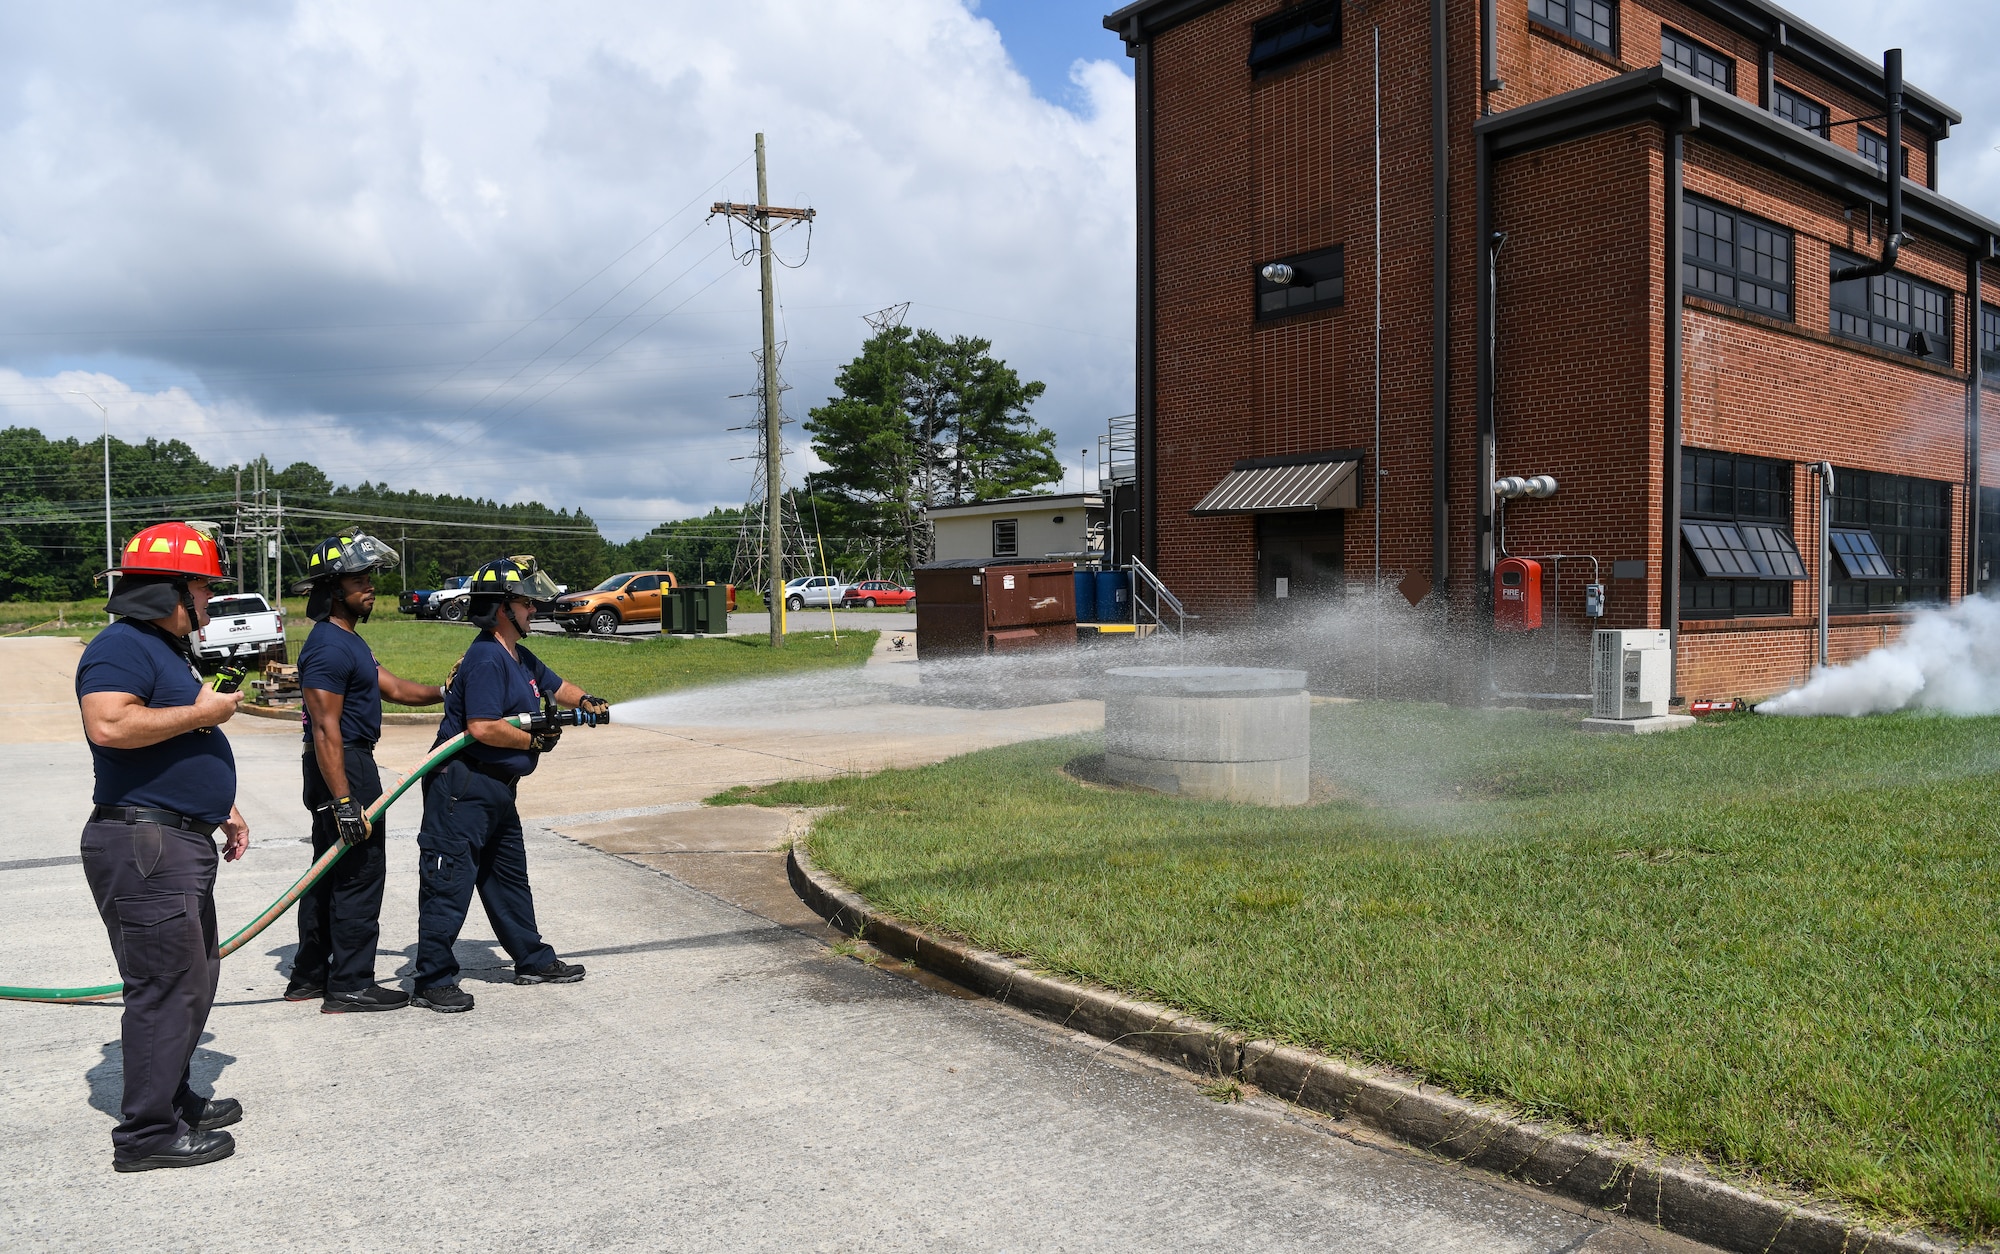 Two firefighters using a fire hose and one standing by with radio